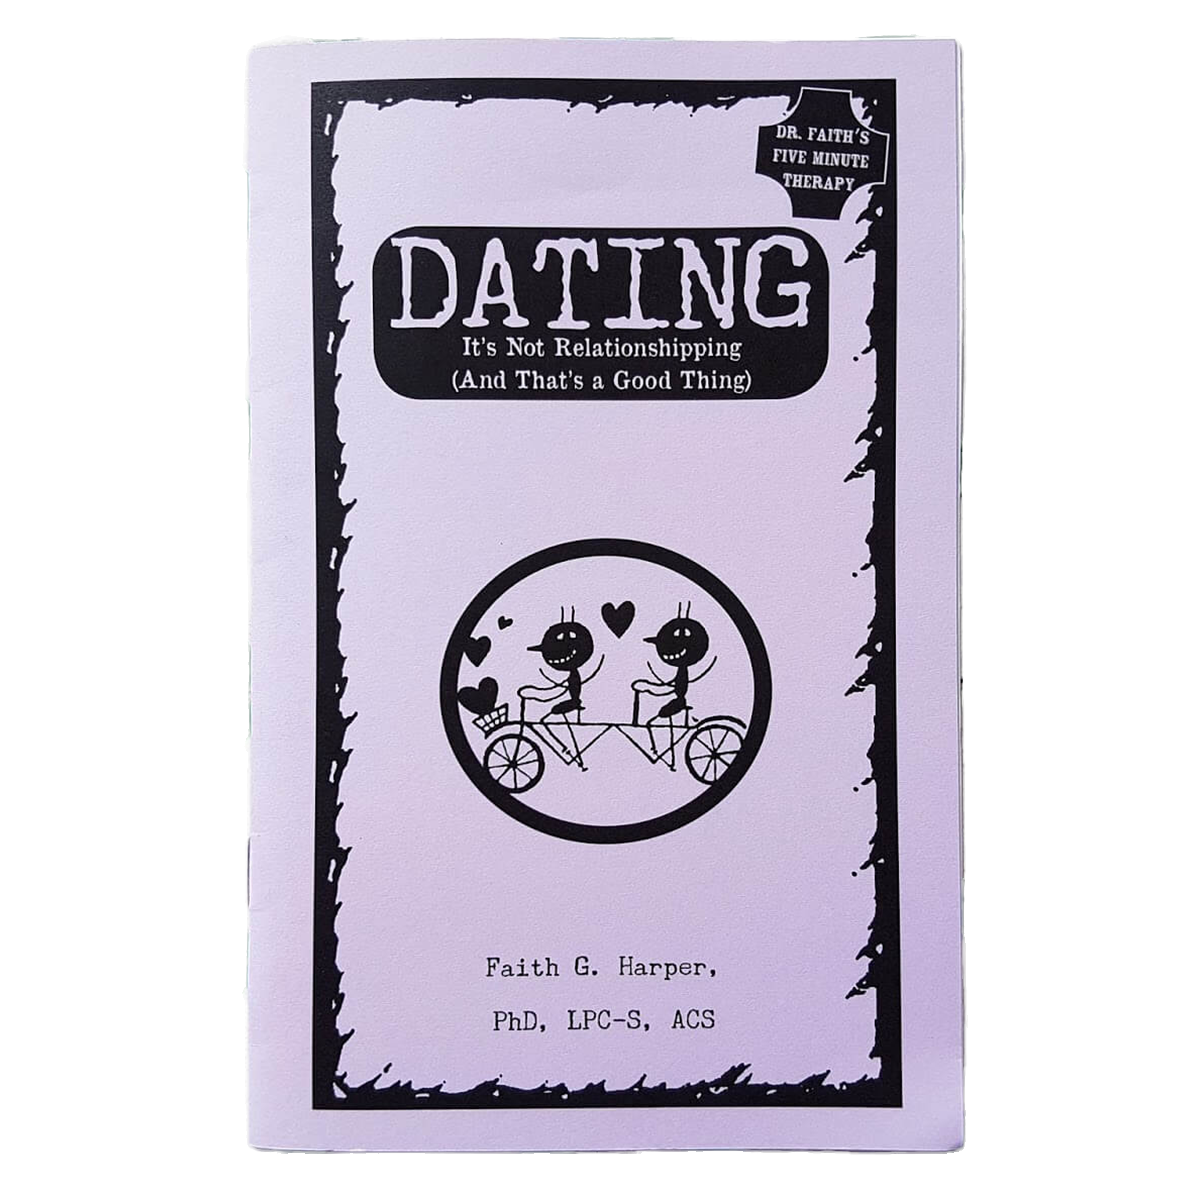 Dating: It's Not Relationshipping Zine